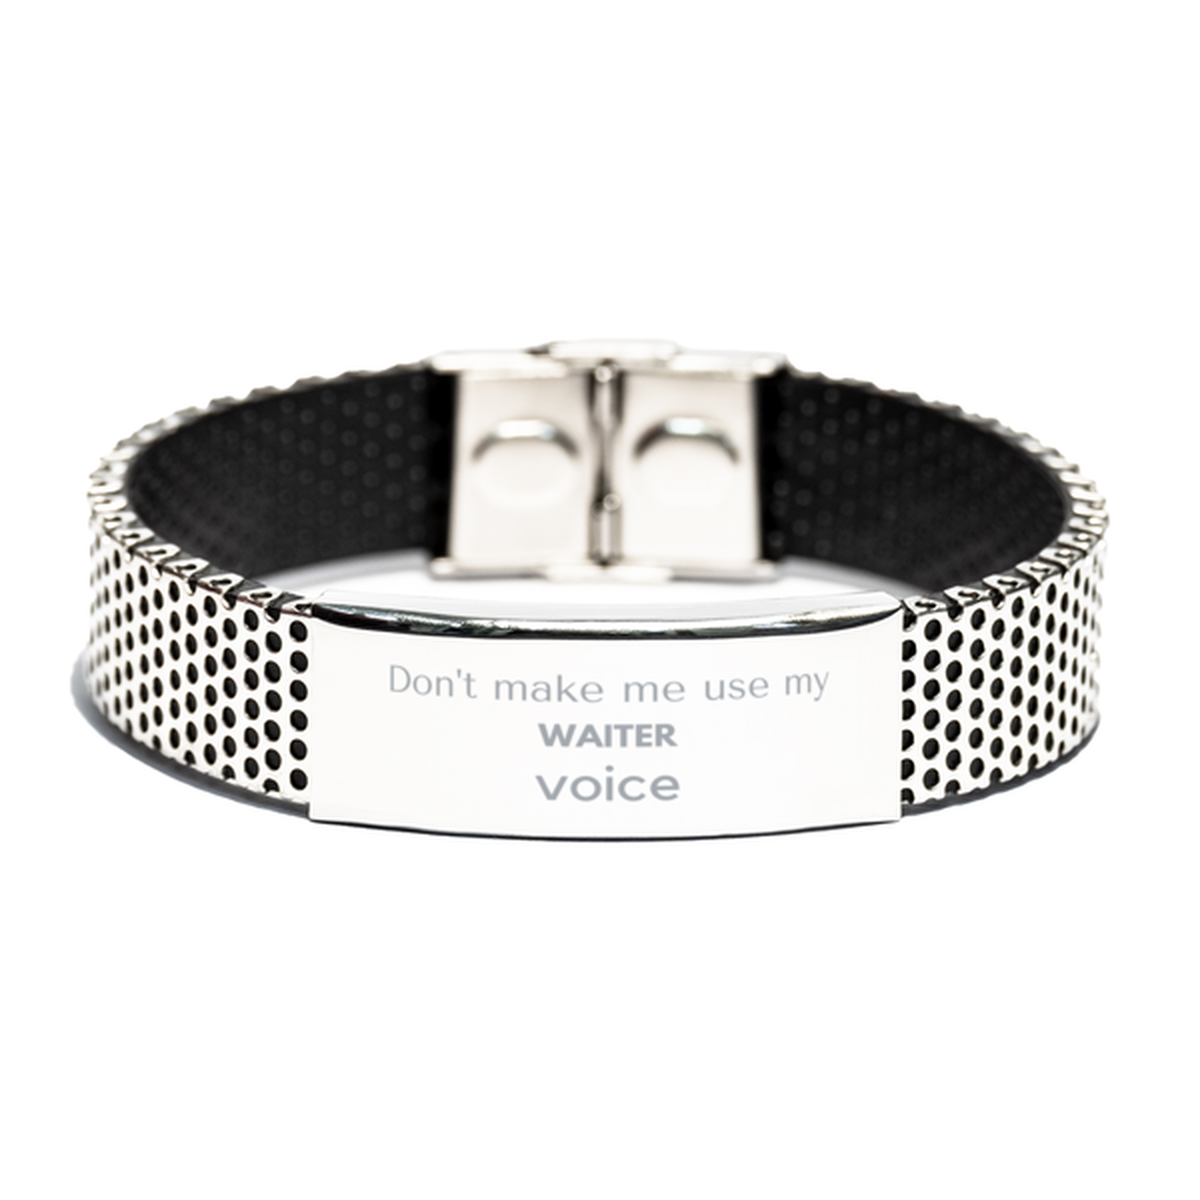 Don't make me use my Waiter voice, Sarcasm Waiter Gifts, Christmas Waiter Stainless Steel Bracelet Birthday Unique Gifts For Waiter Coworkers, Men, Women, Colleague, Friends